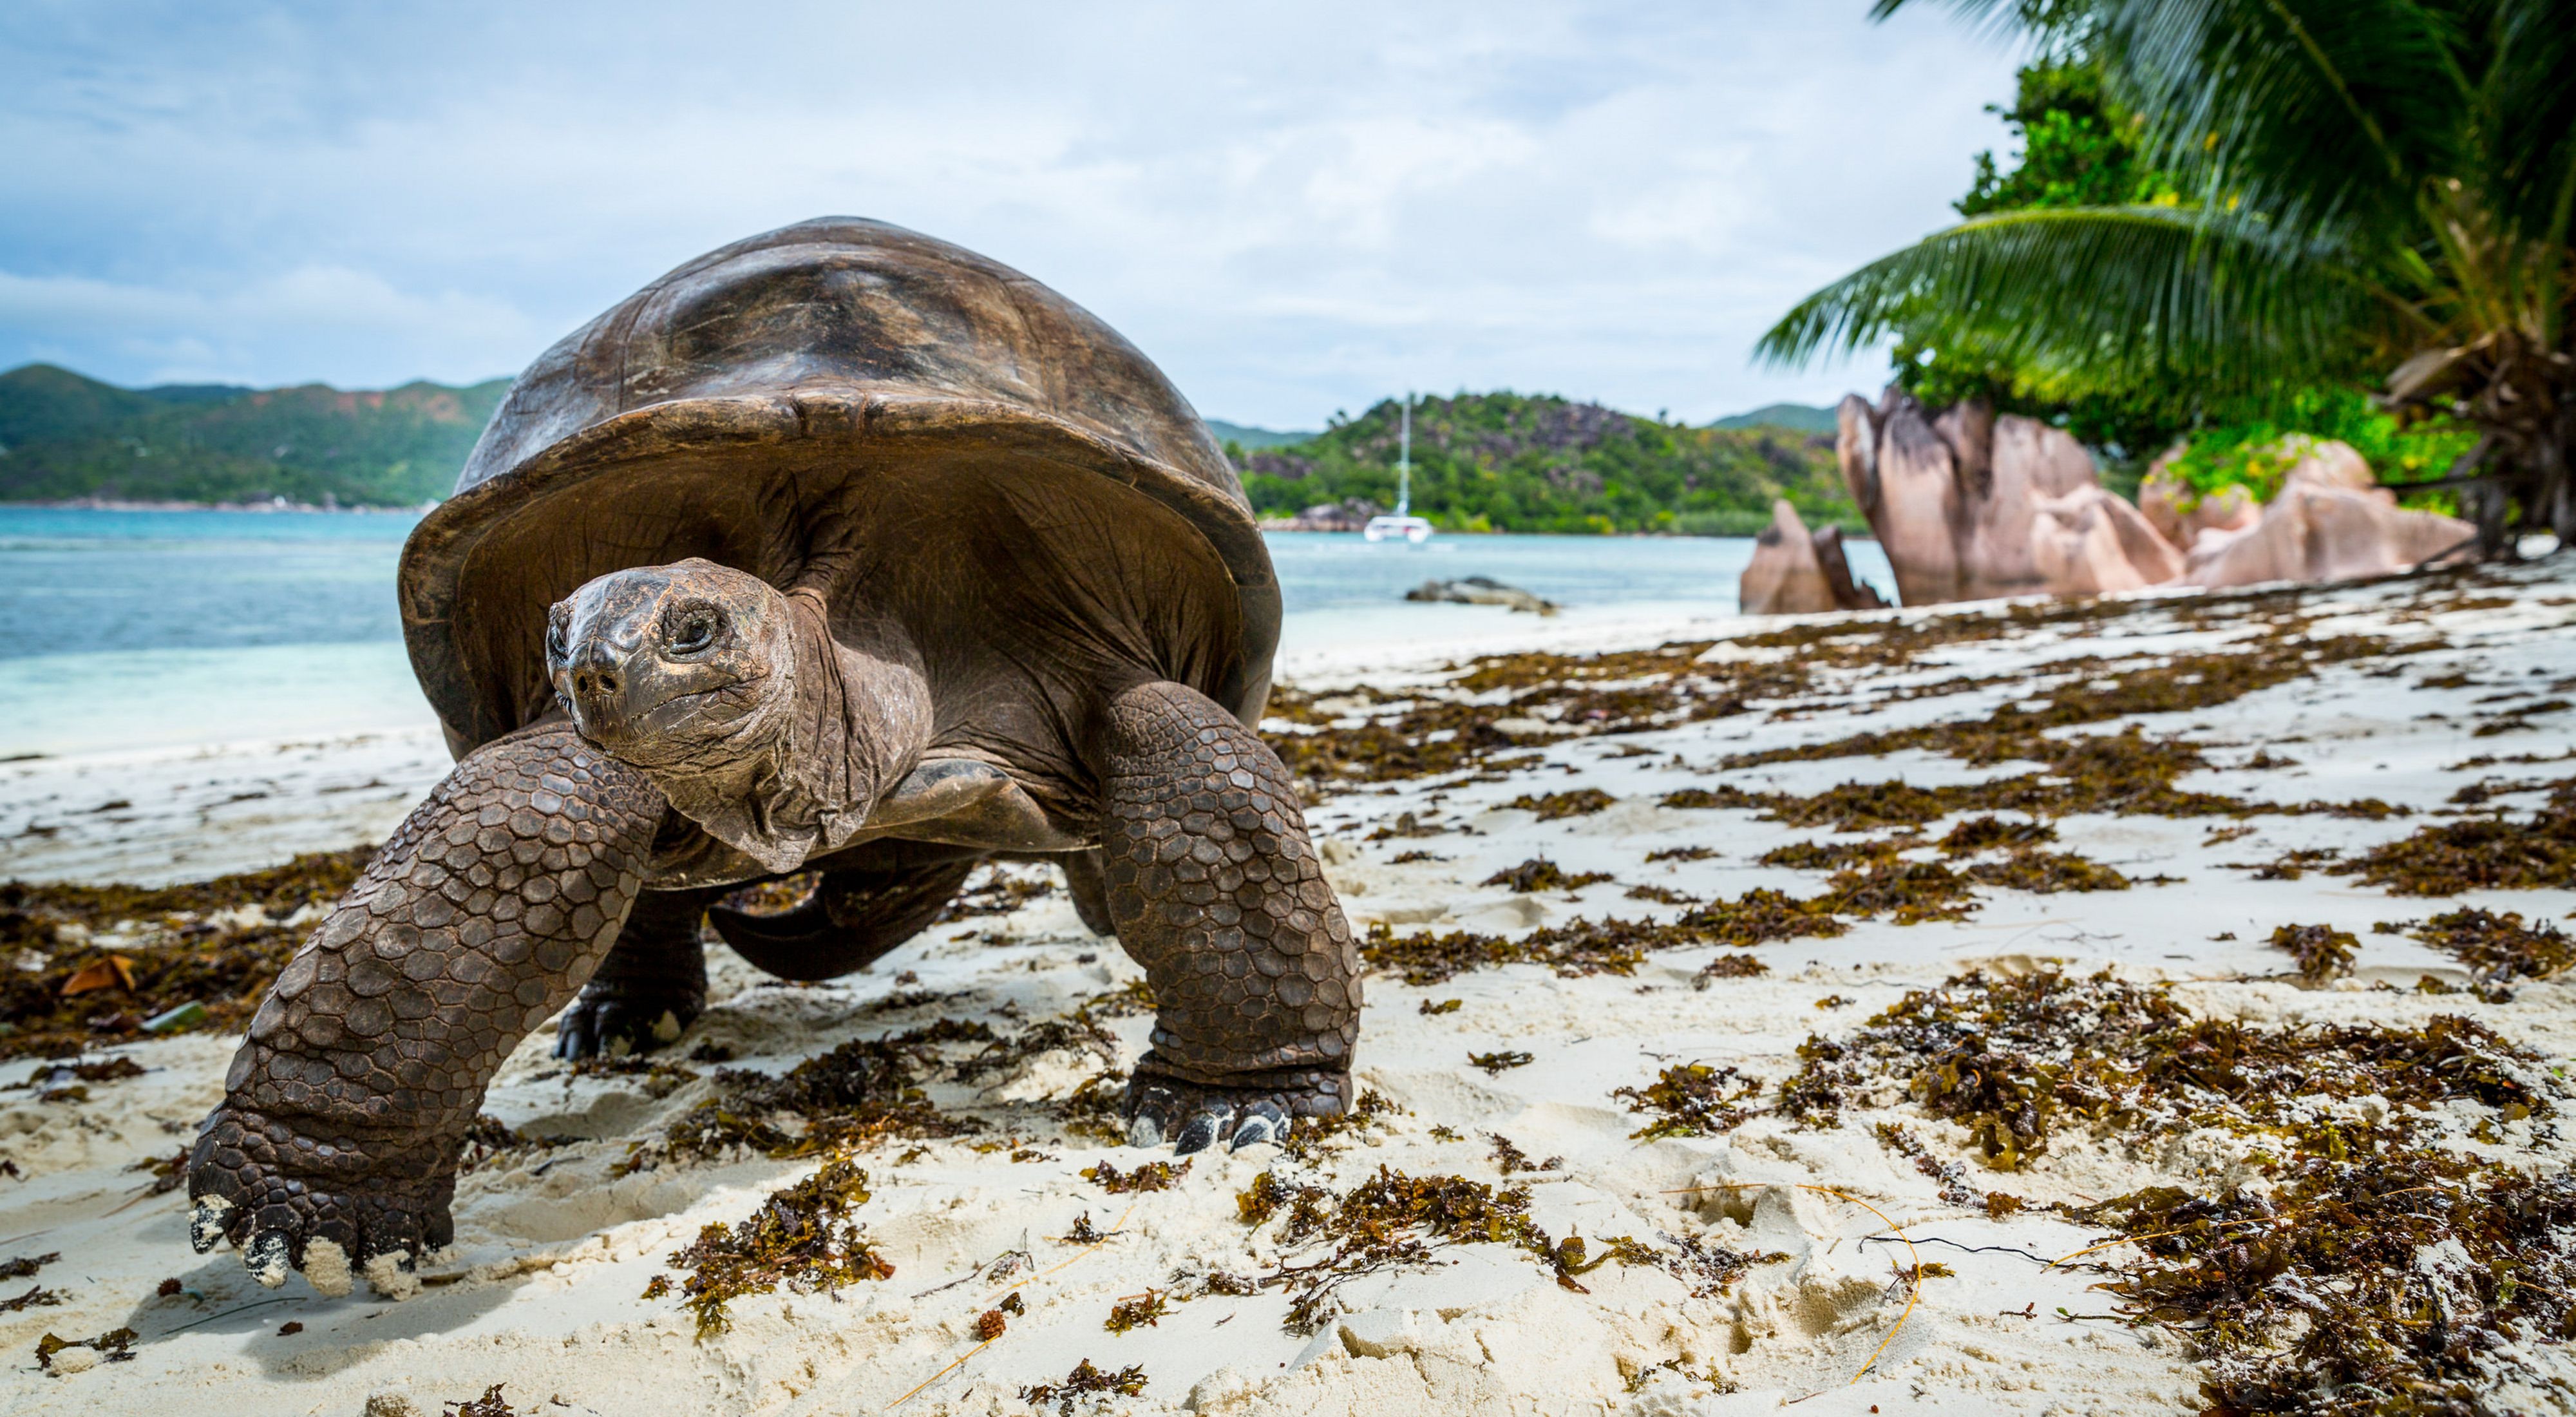 About 300 of free roaming Aldabra giant tortoises live in Curieuse Marine National Park, Curieuse Island, Seychelles. They make up the second largest population in the world. 